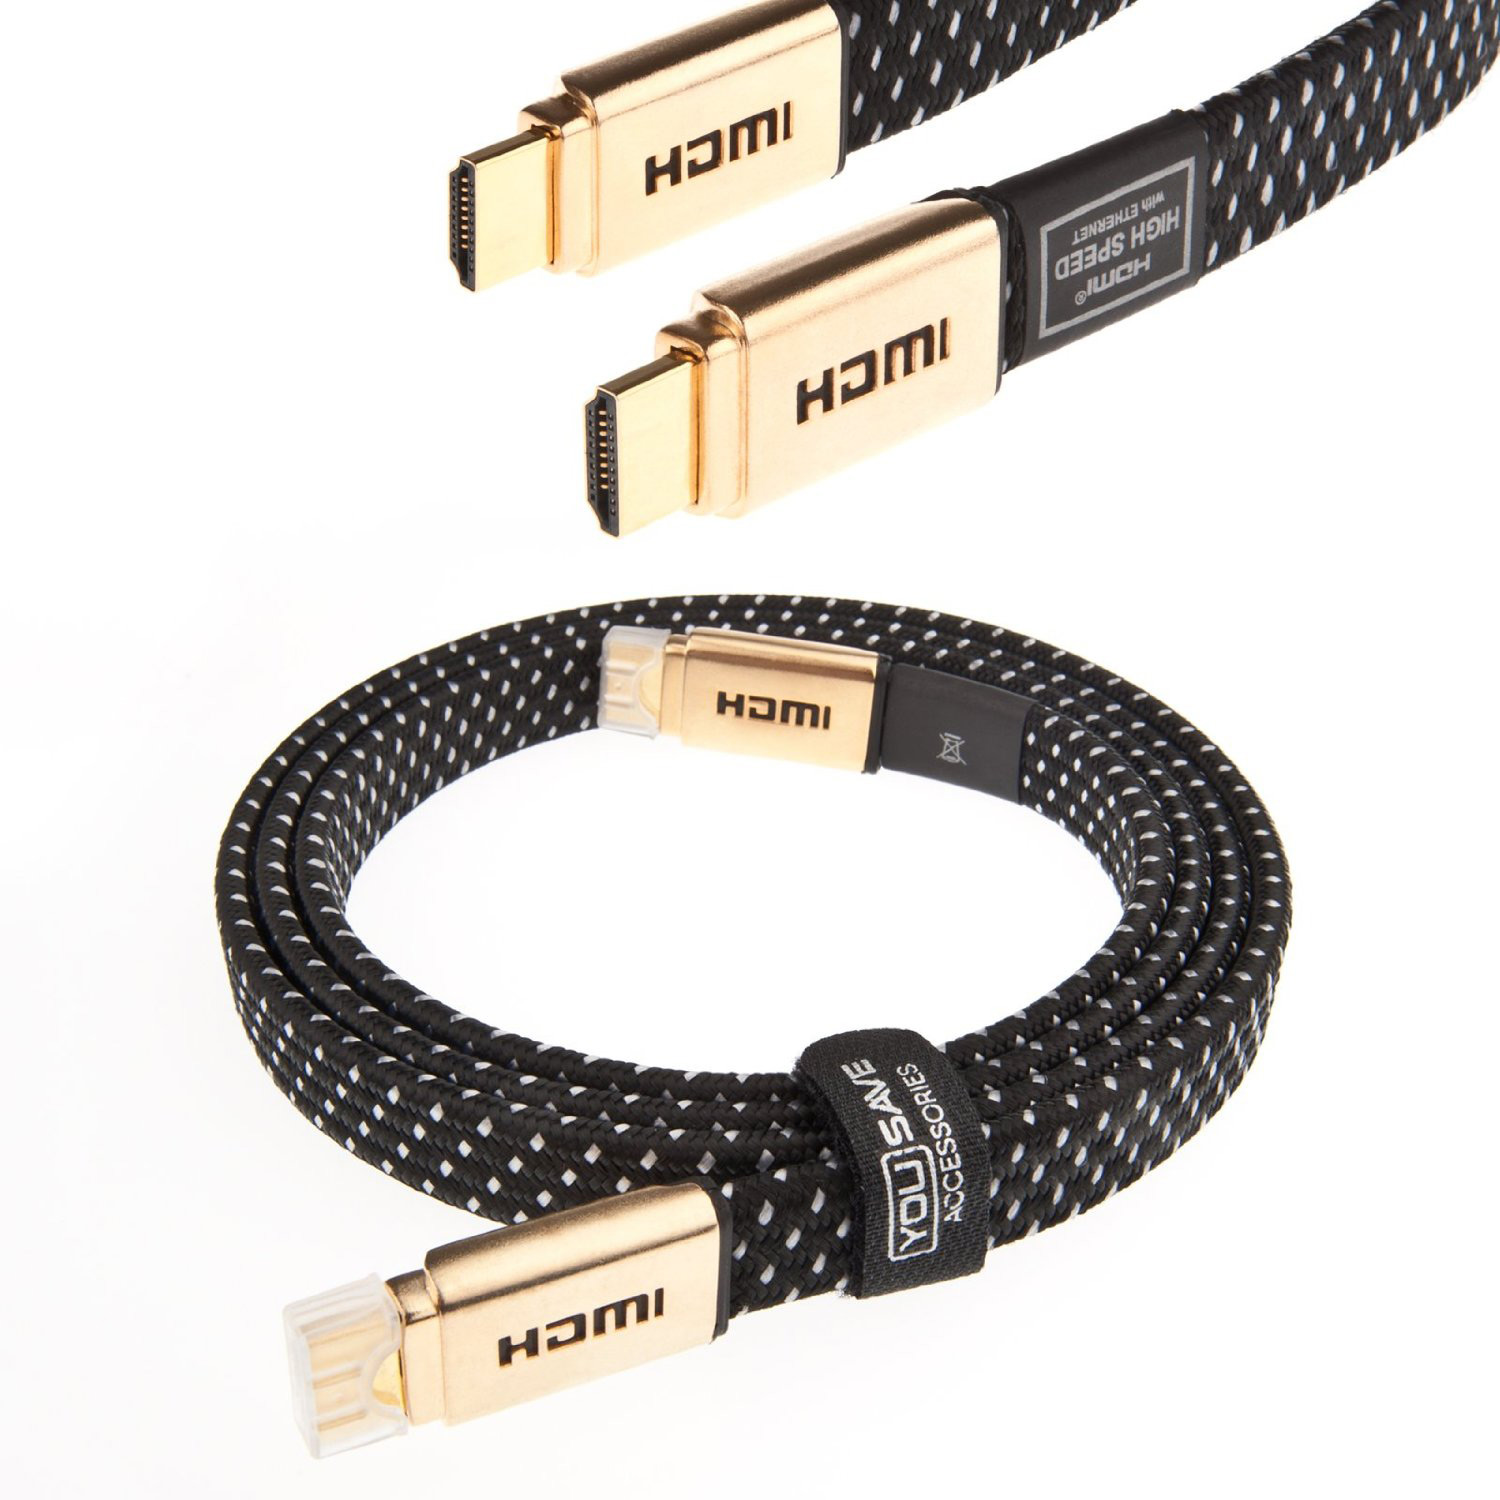 YouSave HDMI Cable 1.5M High Speed Gold Edition